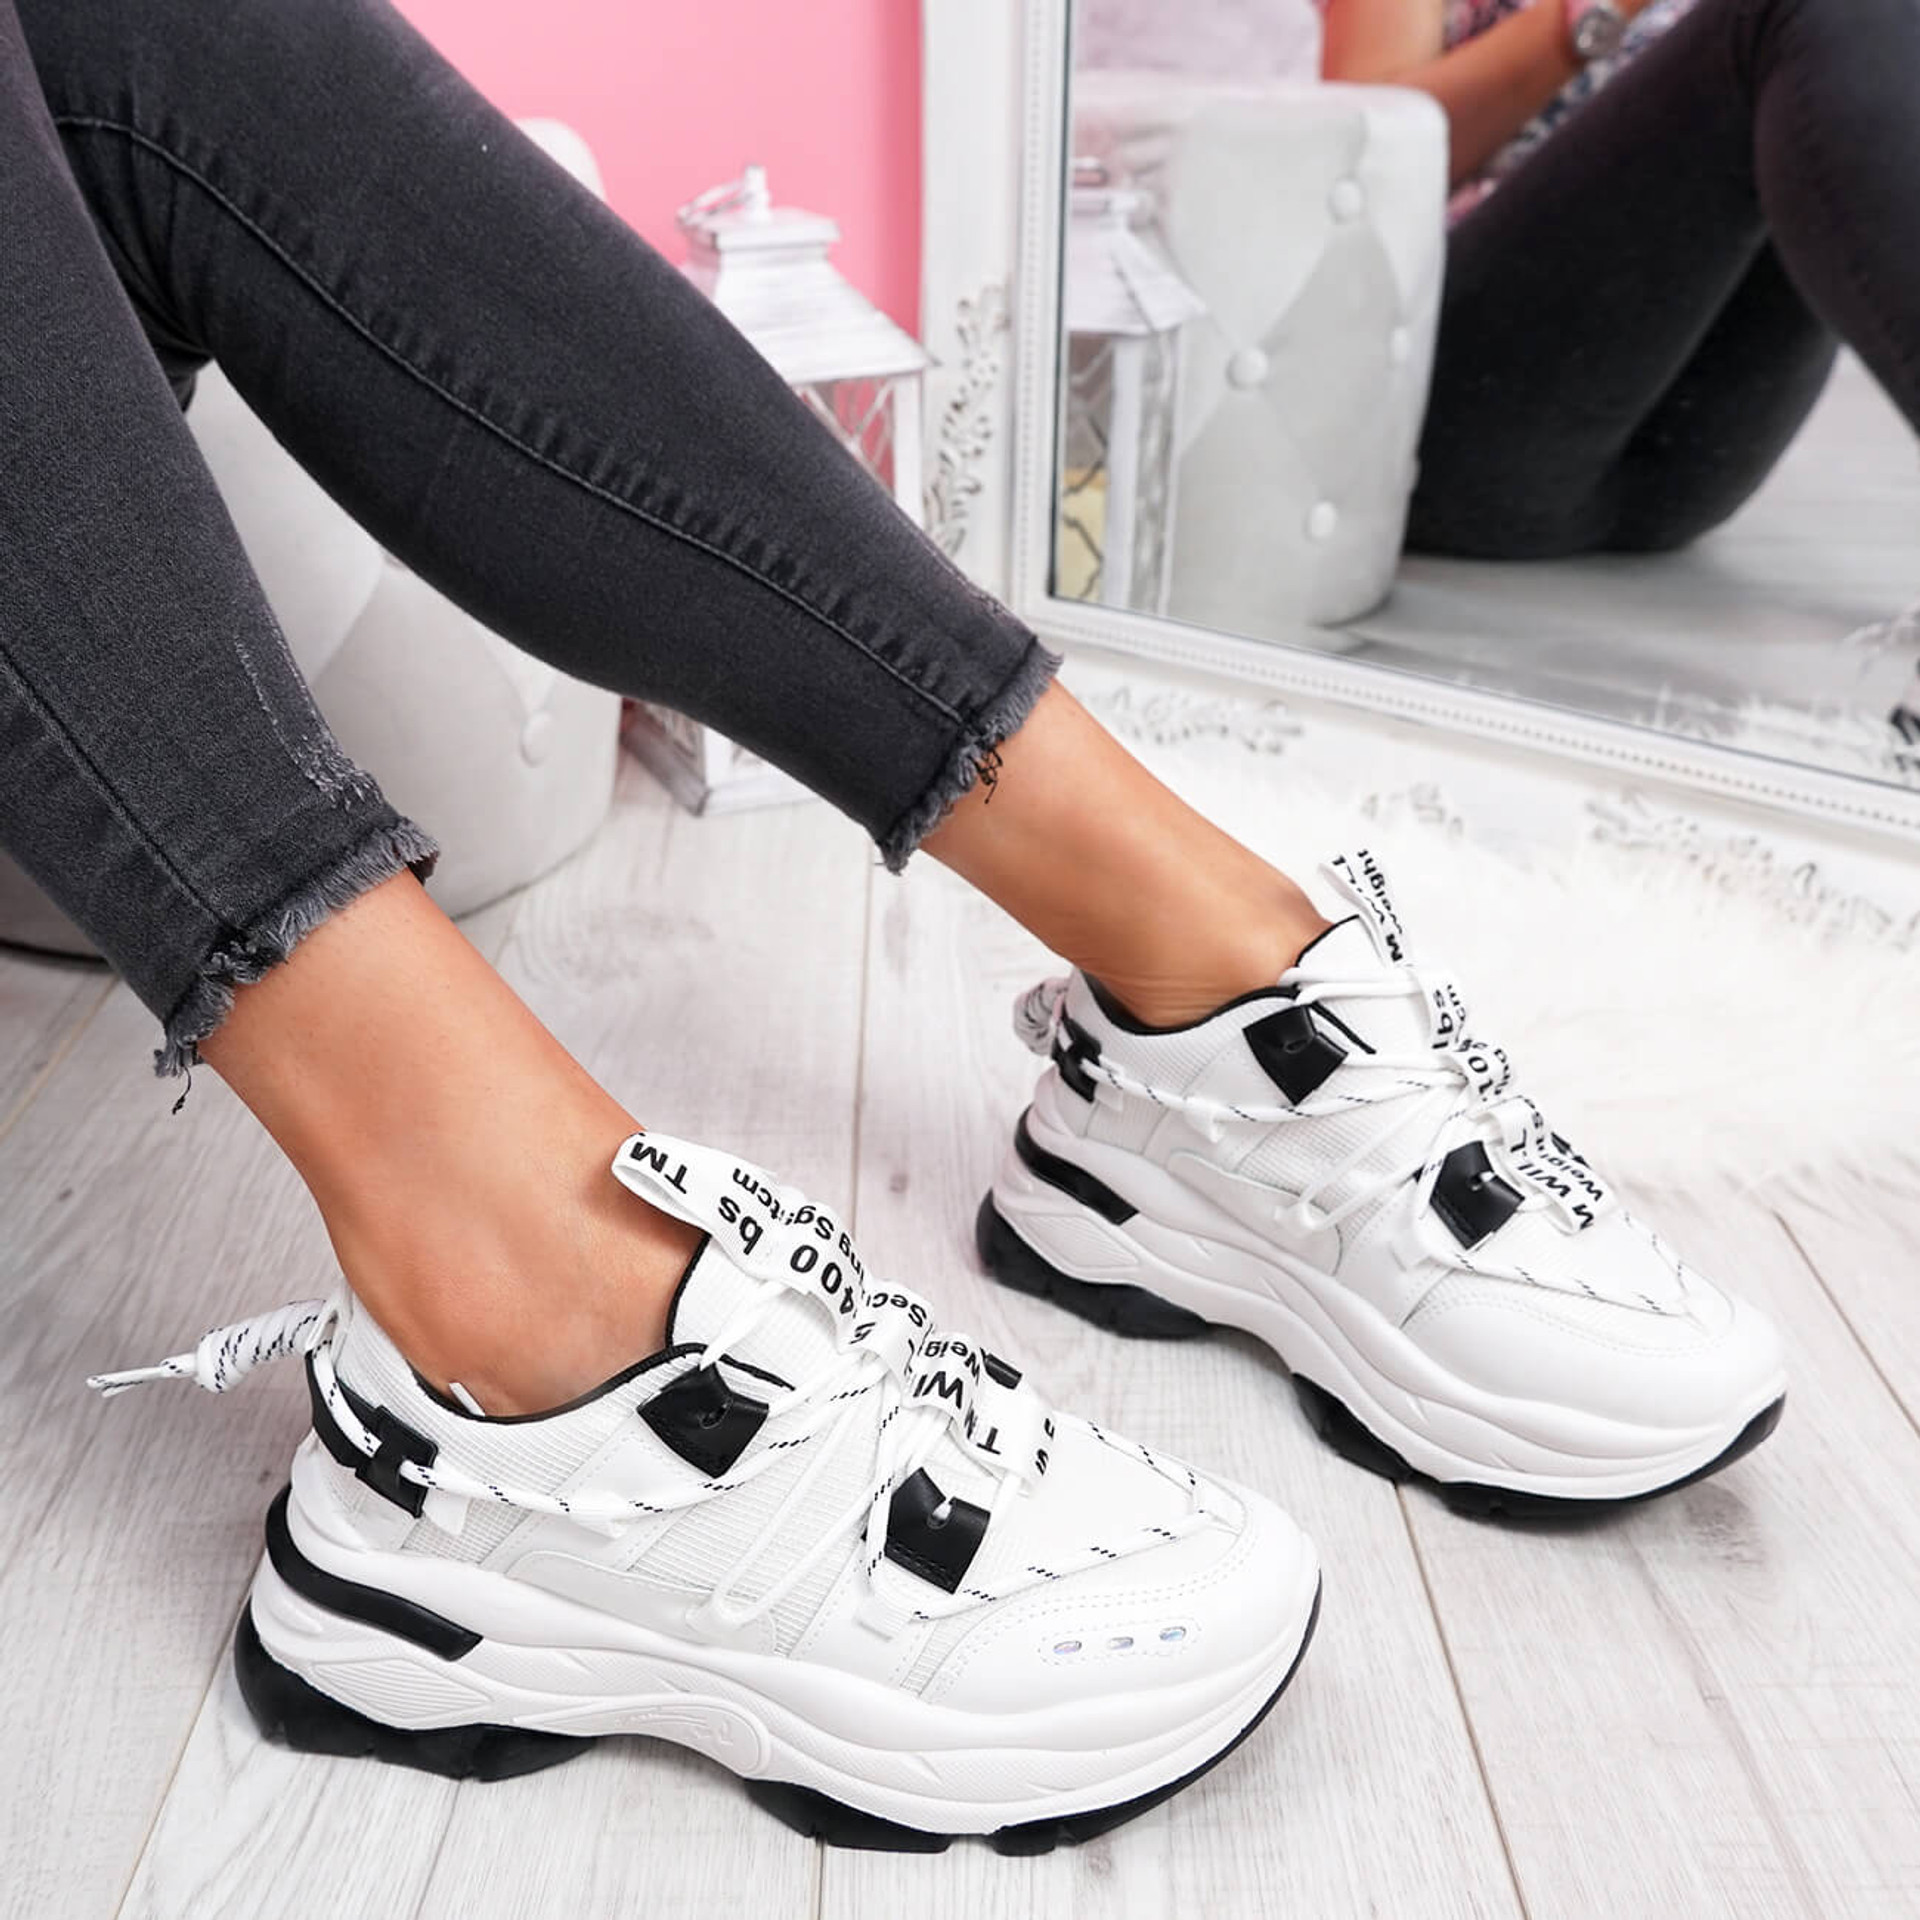 womens ladies lace up chunky sole sneakers party trainers women shoes size uk 3 4 5 6 7 8